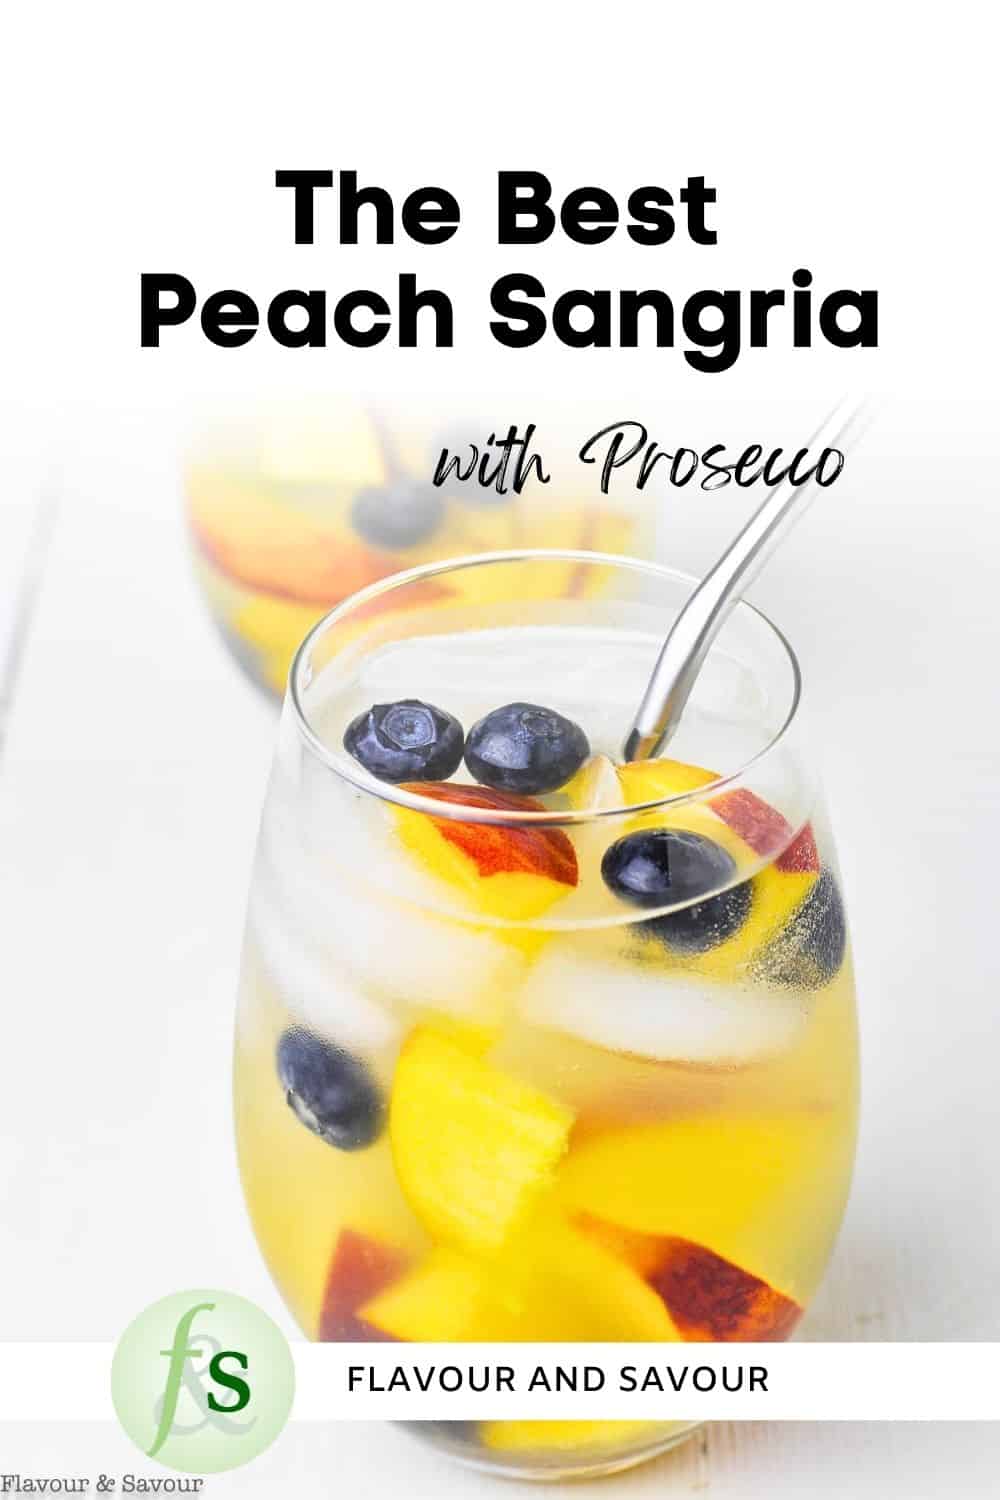 Image with text overlay for The Best Peach Sangria with Prosecco.